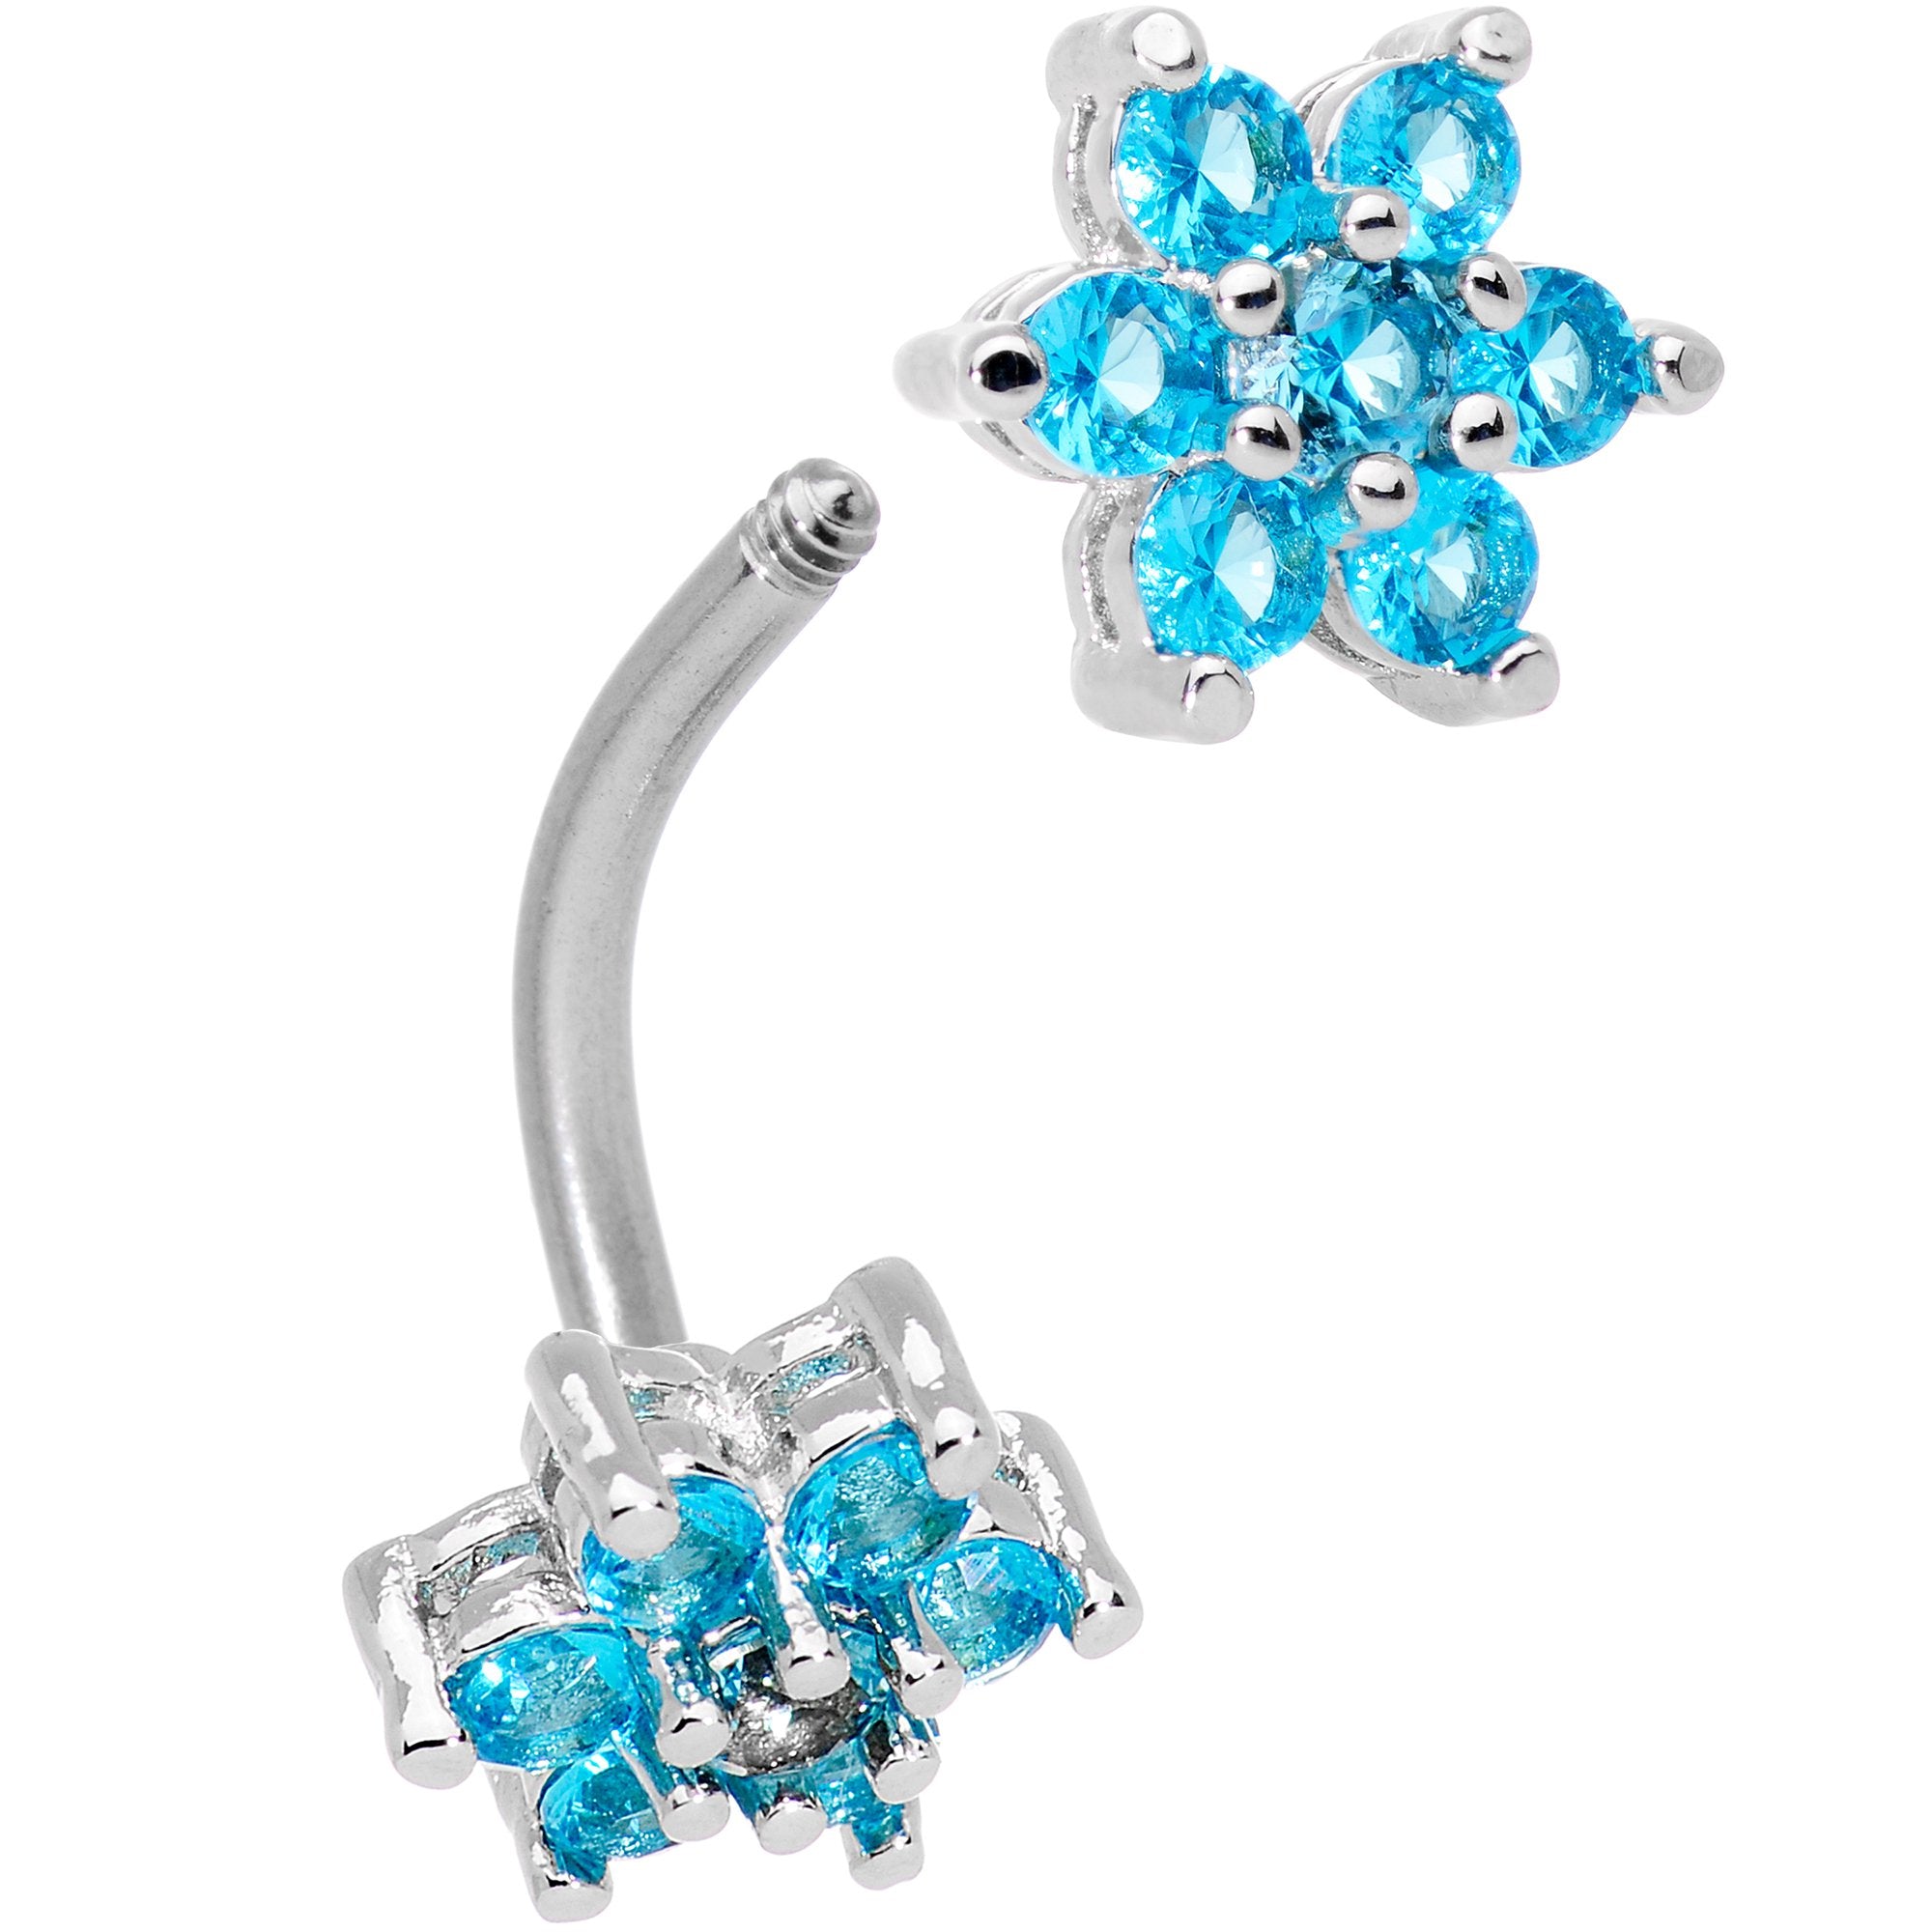 Clear Aqua Gem Double Star Reversible Double Mount Belly Ring